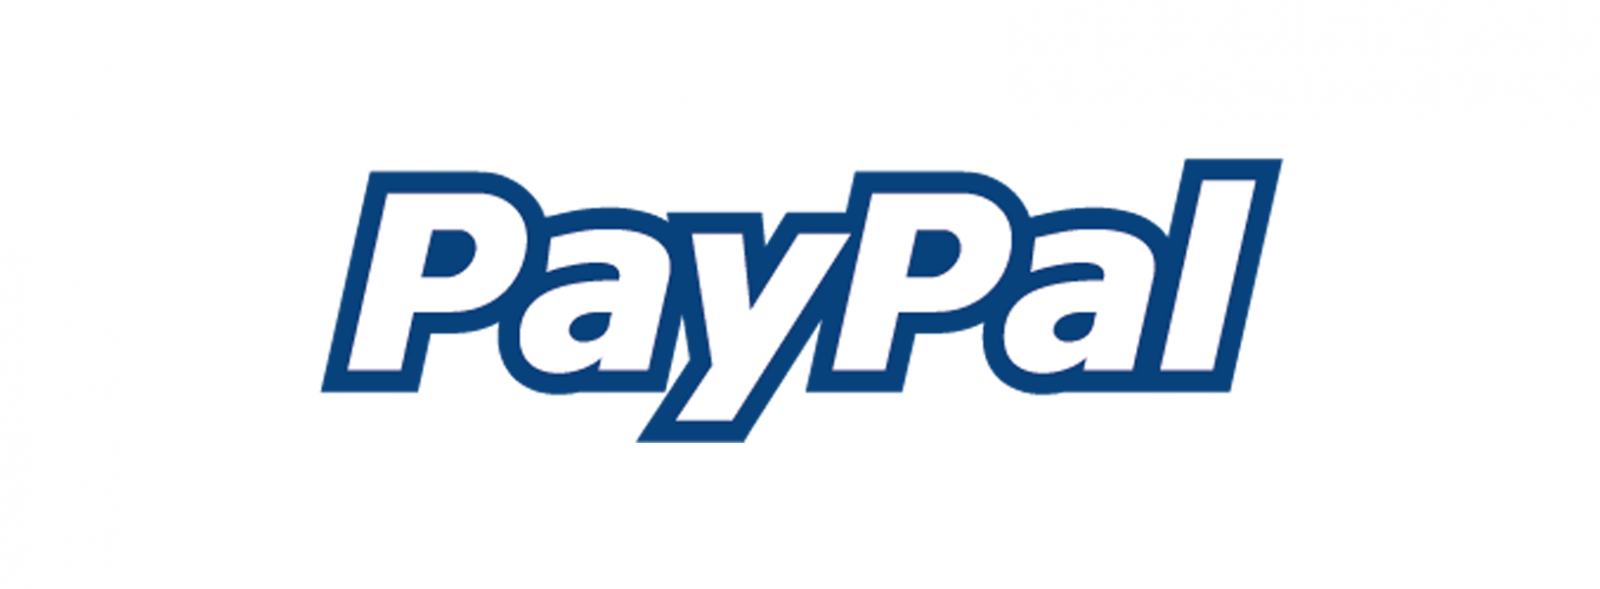 fringe exempt About setting PayPal Poker Sites - Online Poker Rooms Accepting PayPal Deposits in 2022